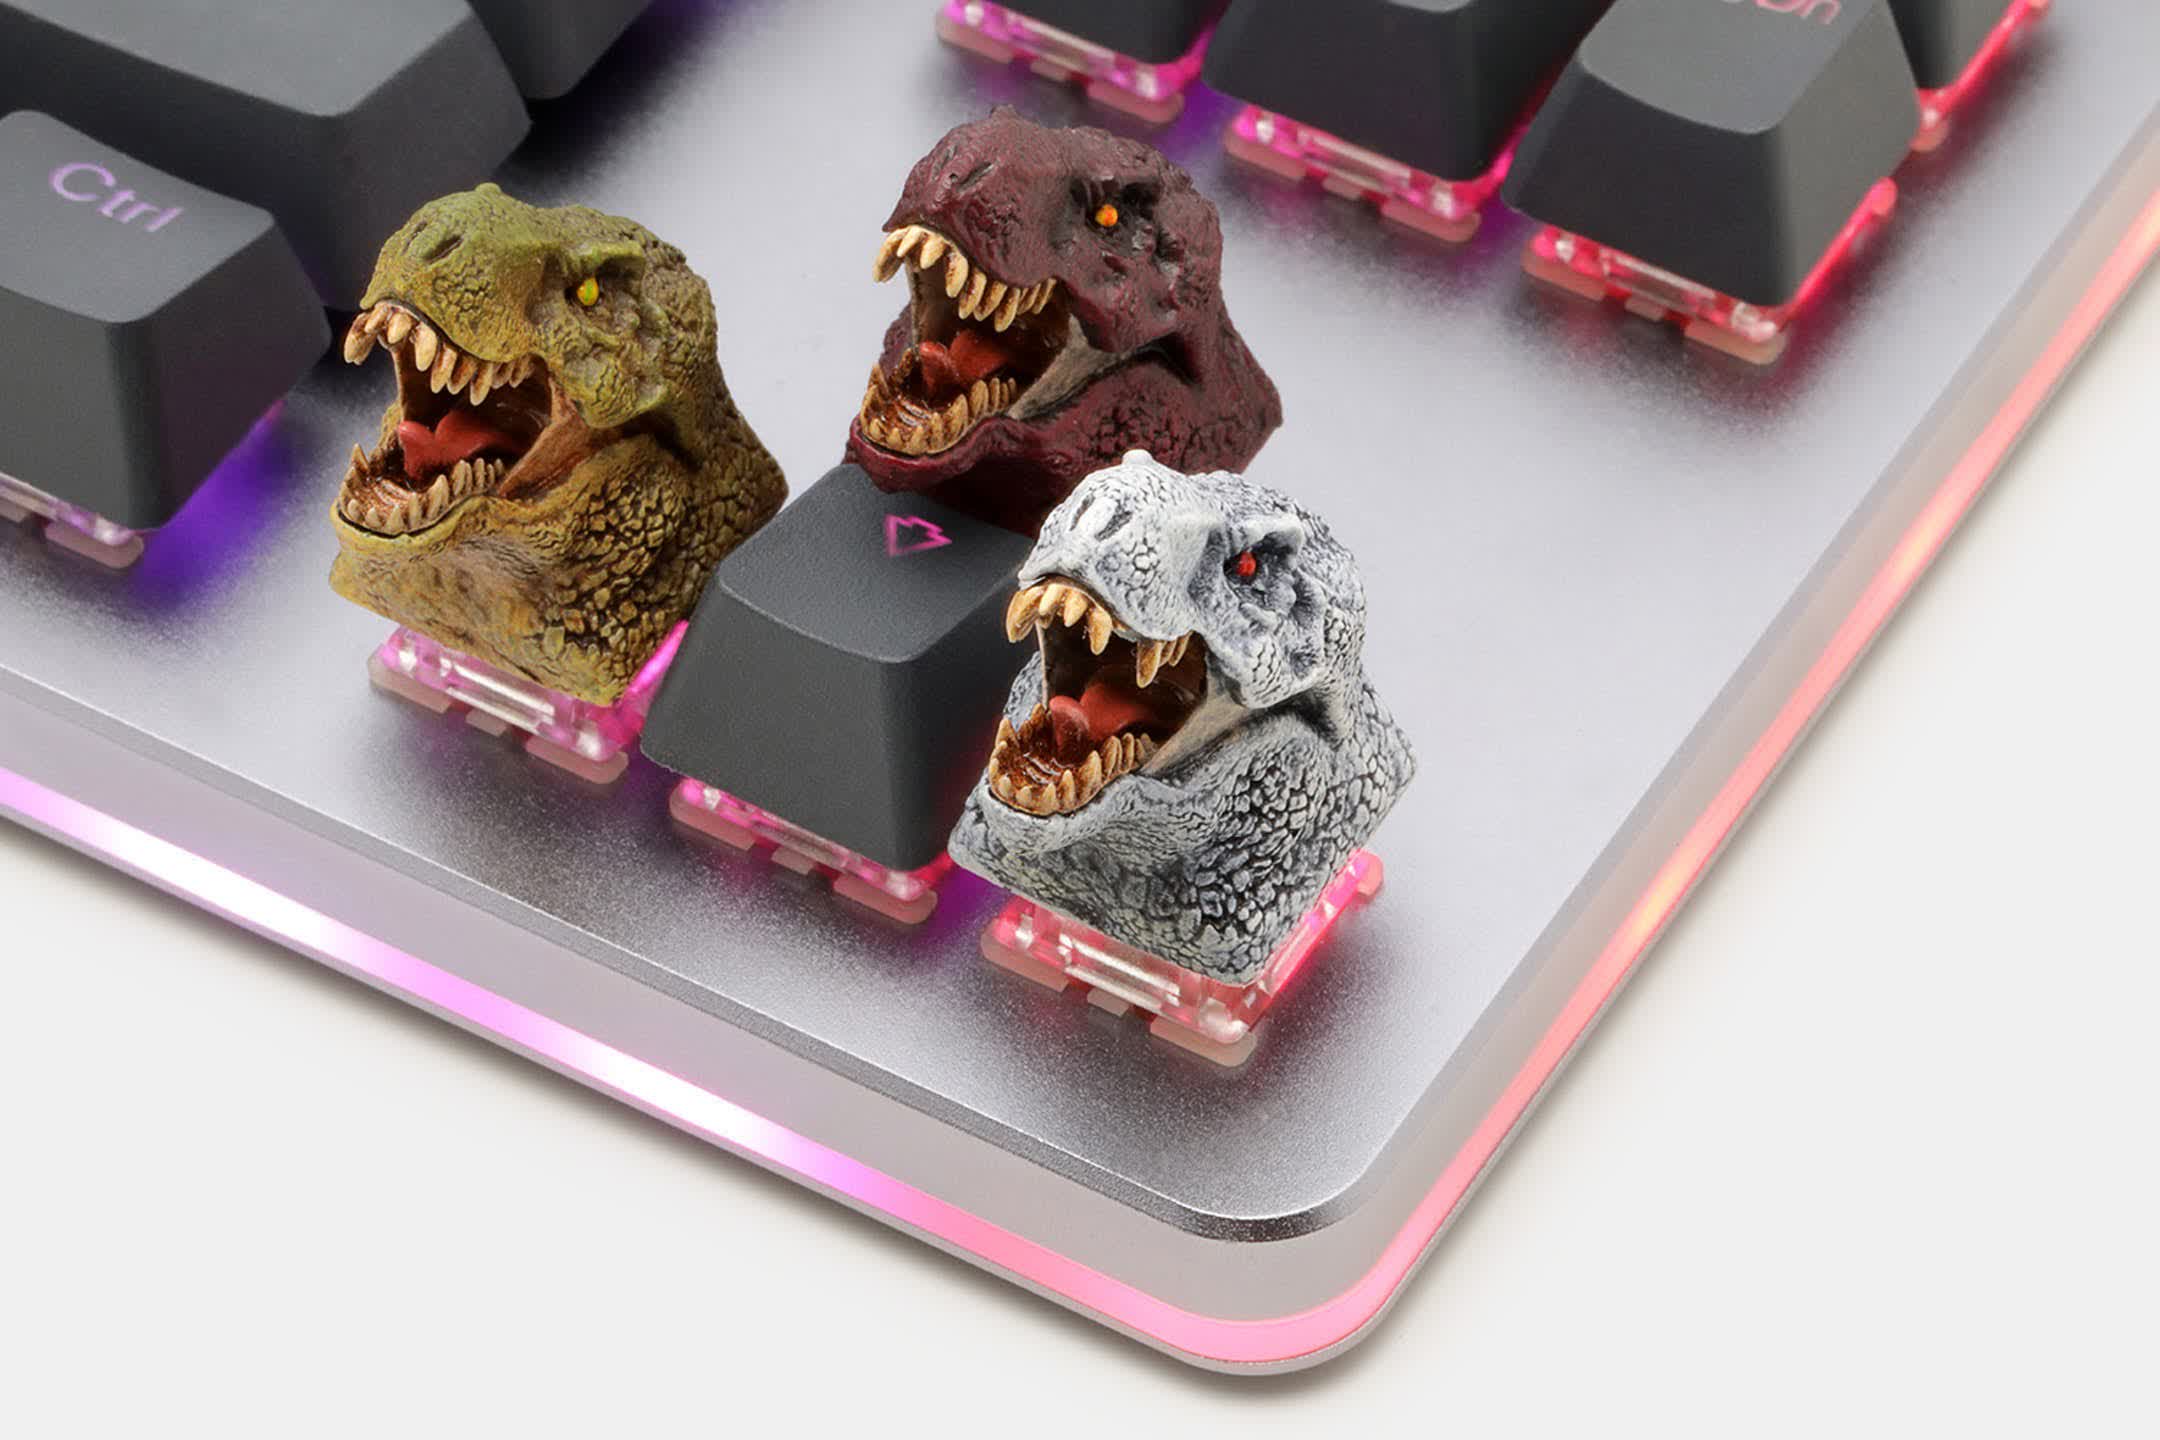 These awesome if impractical keycaps are perfect for dinosaur fans